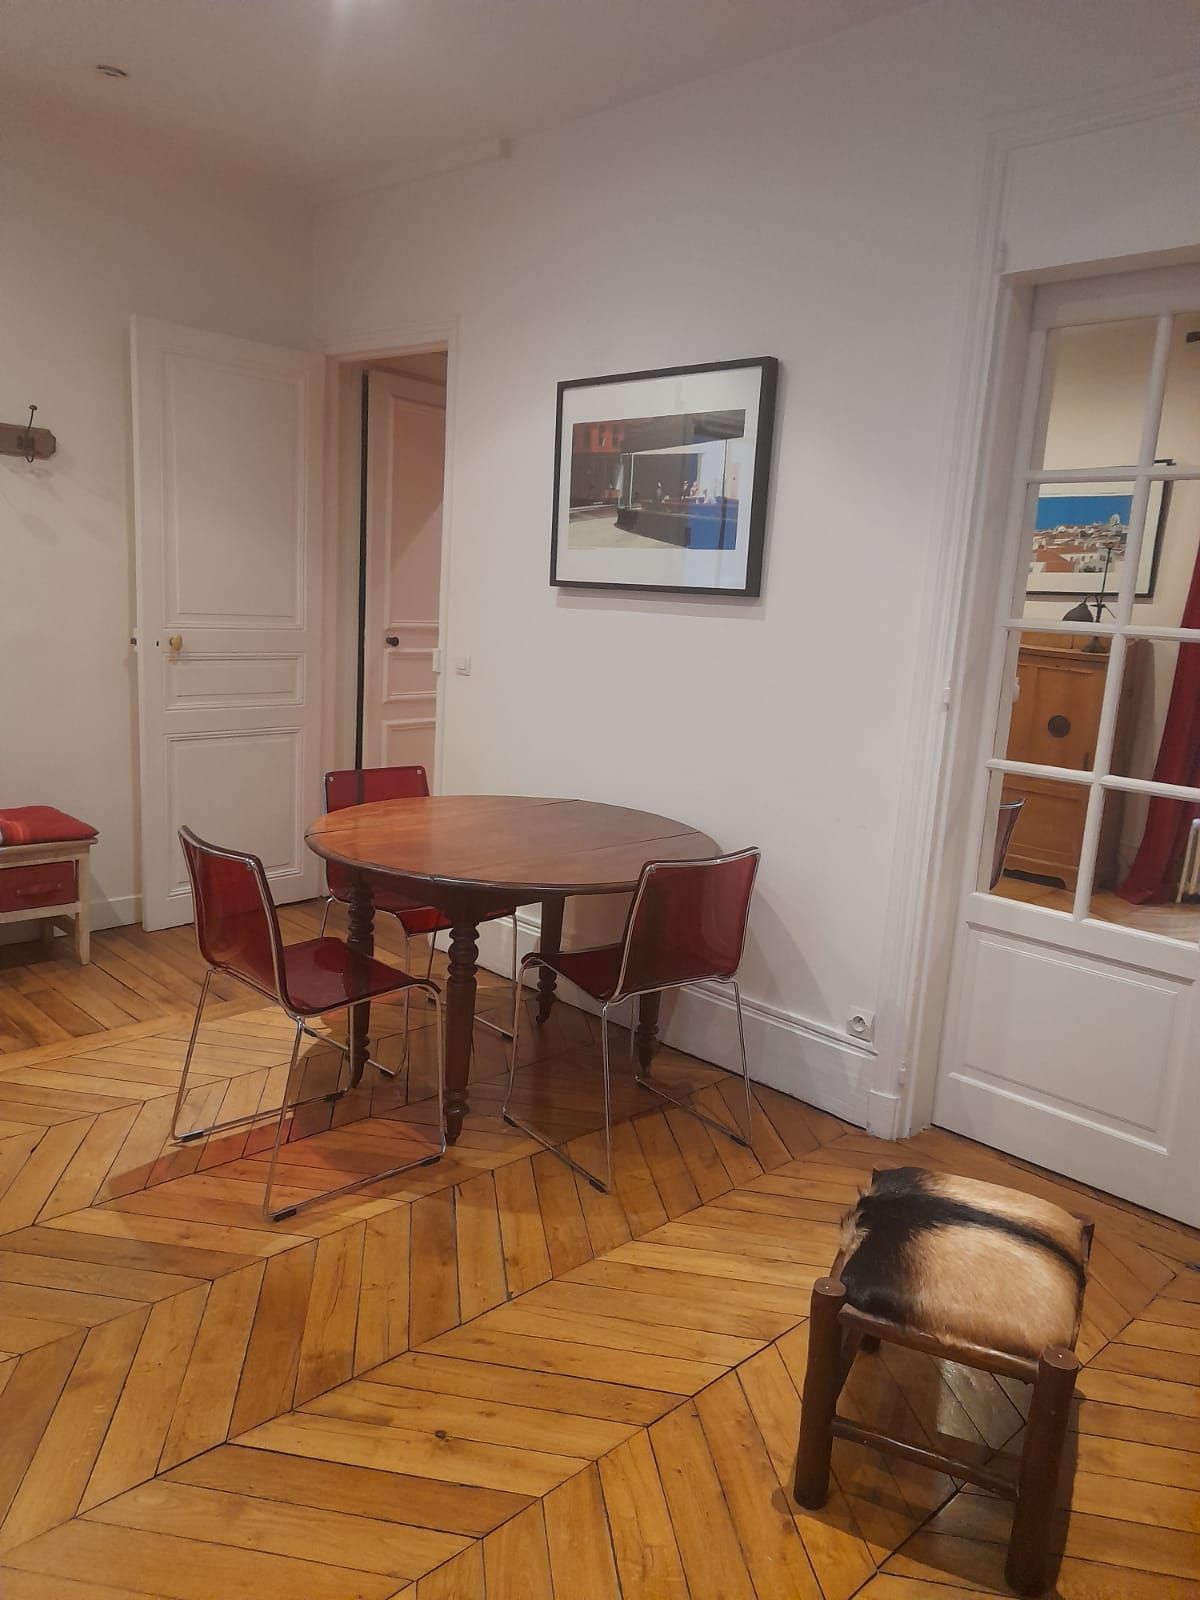 Gorgeous and fantastic home in excellent location (Paris)